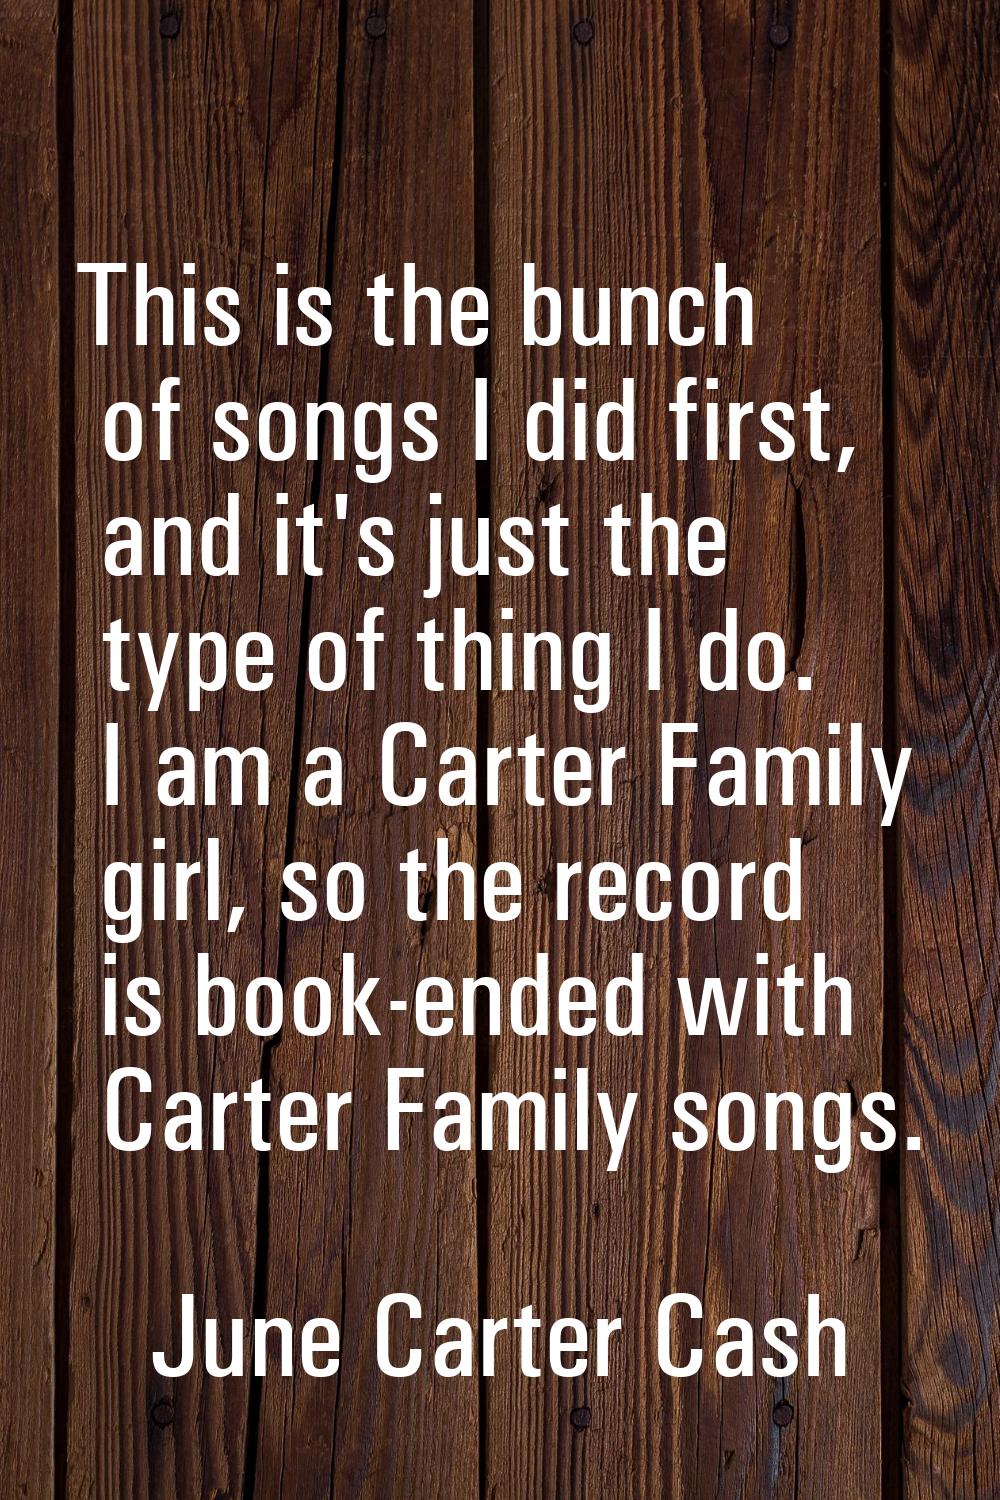 This is the bunch of songs I did first, and it's just the type of thing I do. I am a Carter Family 